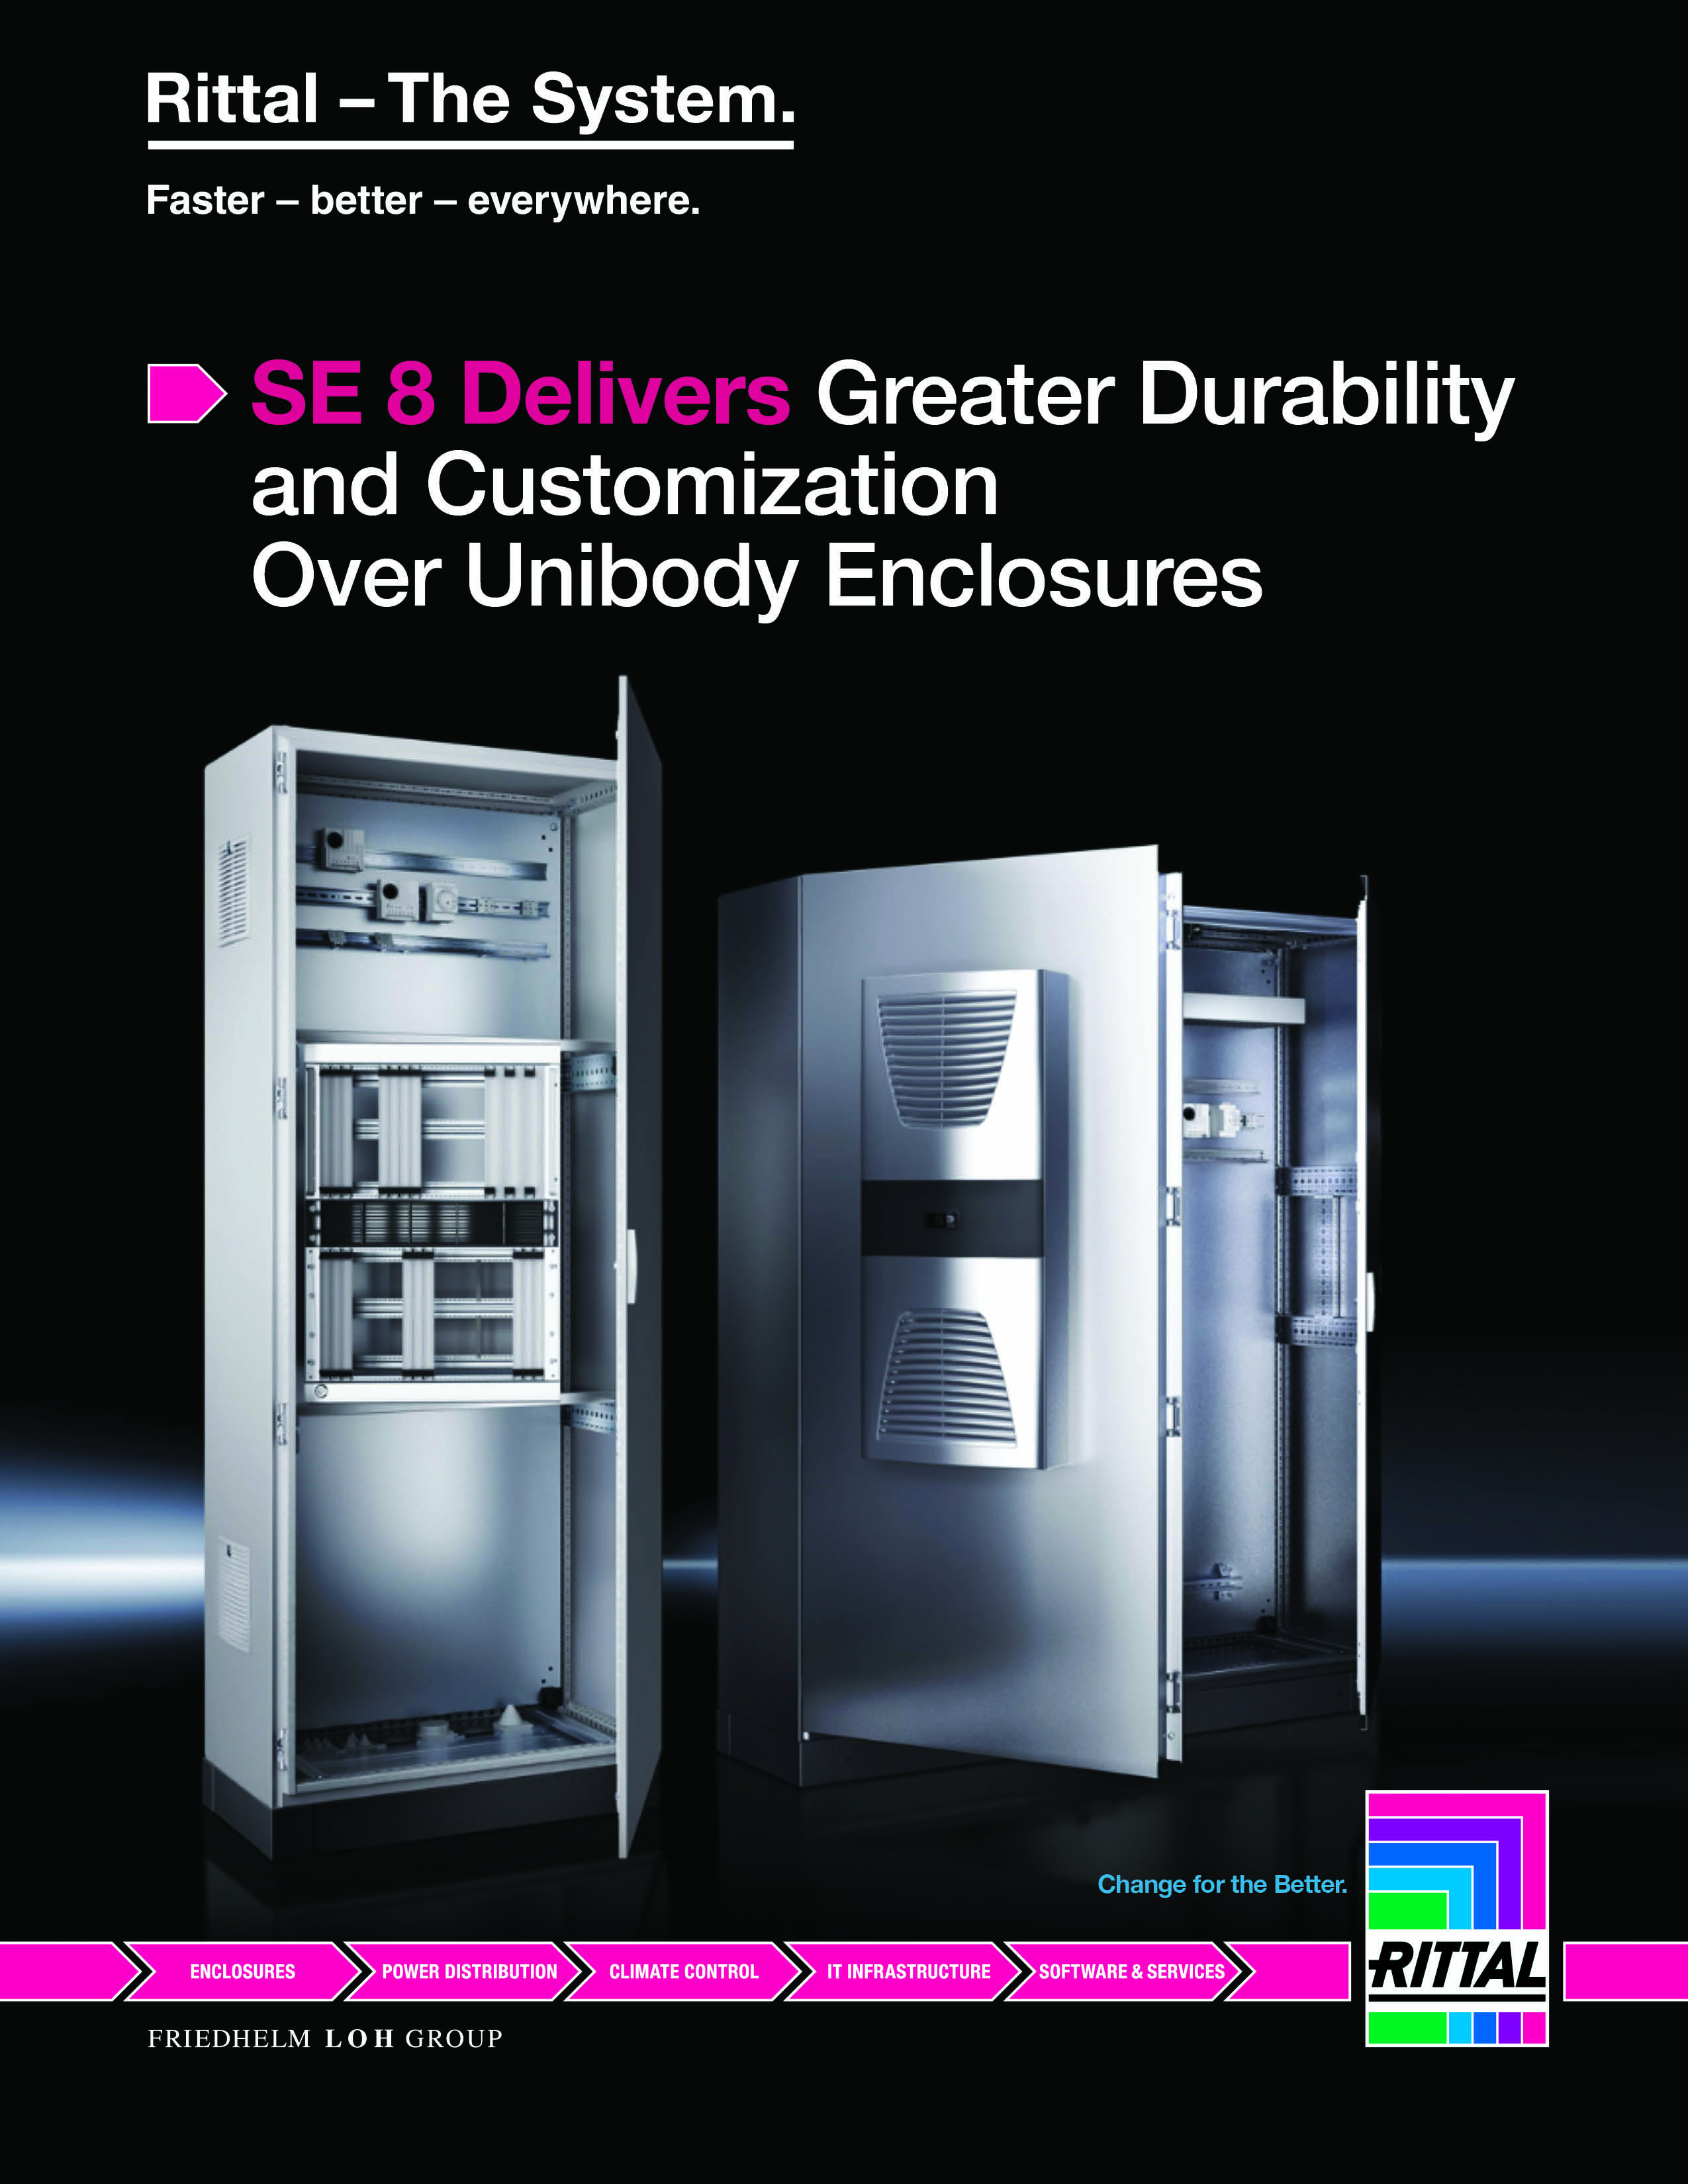 New Enclosure Line Offers Better Value and Durability Than Unibody Enclosures